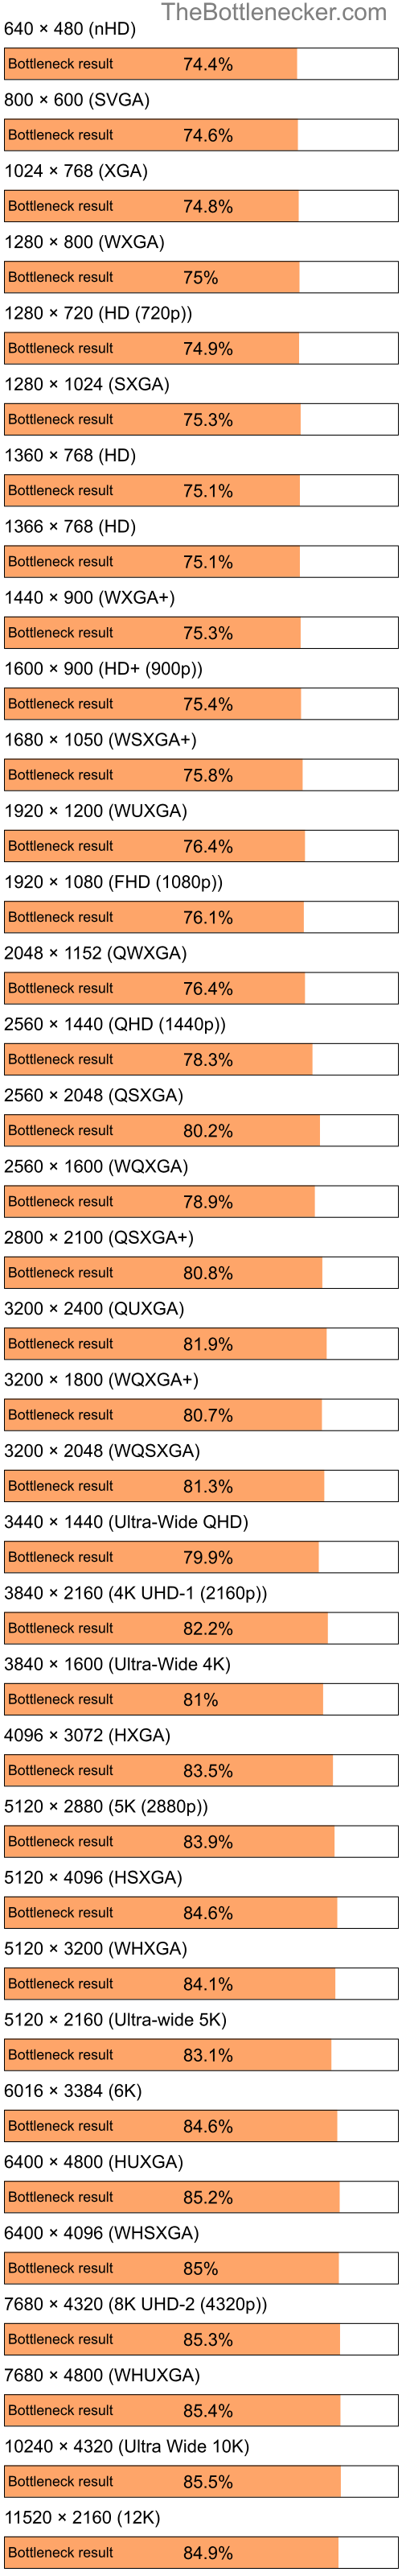 Bottleneck results by resolution for Intel Pentium 4 and NVIDIA GeForce 6100 in Processor Intense Tasks